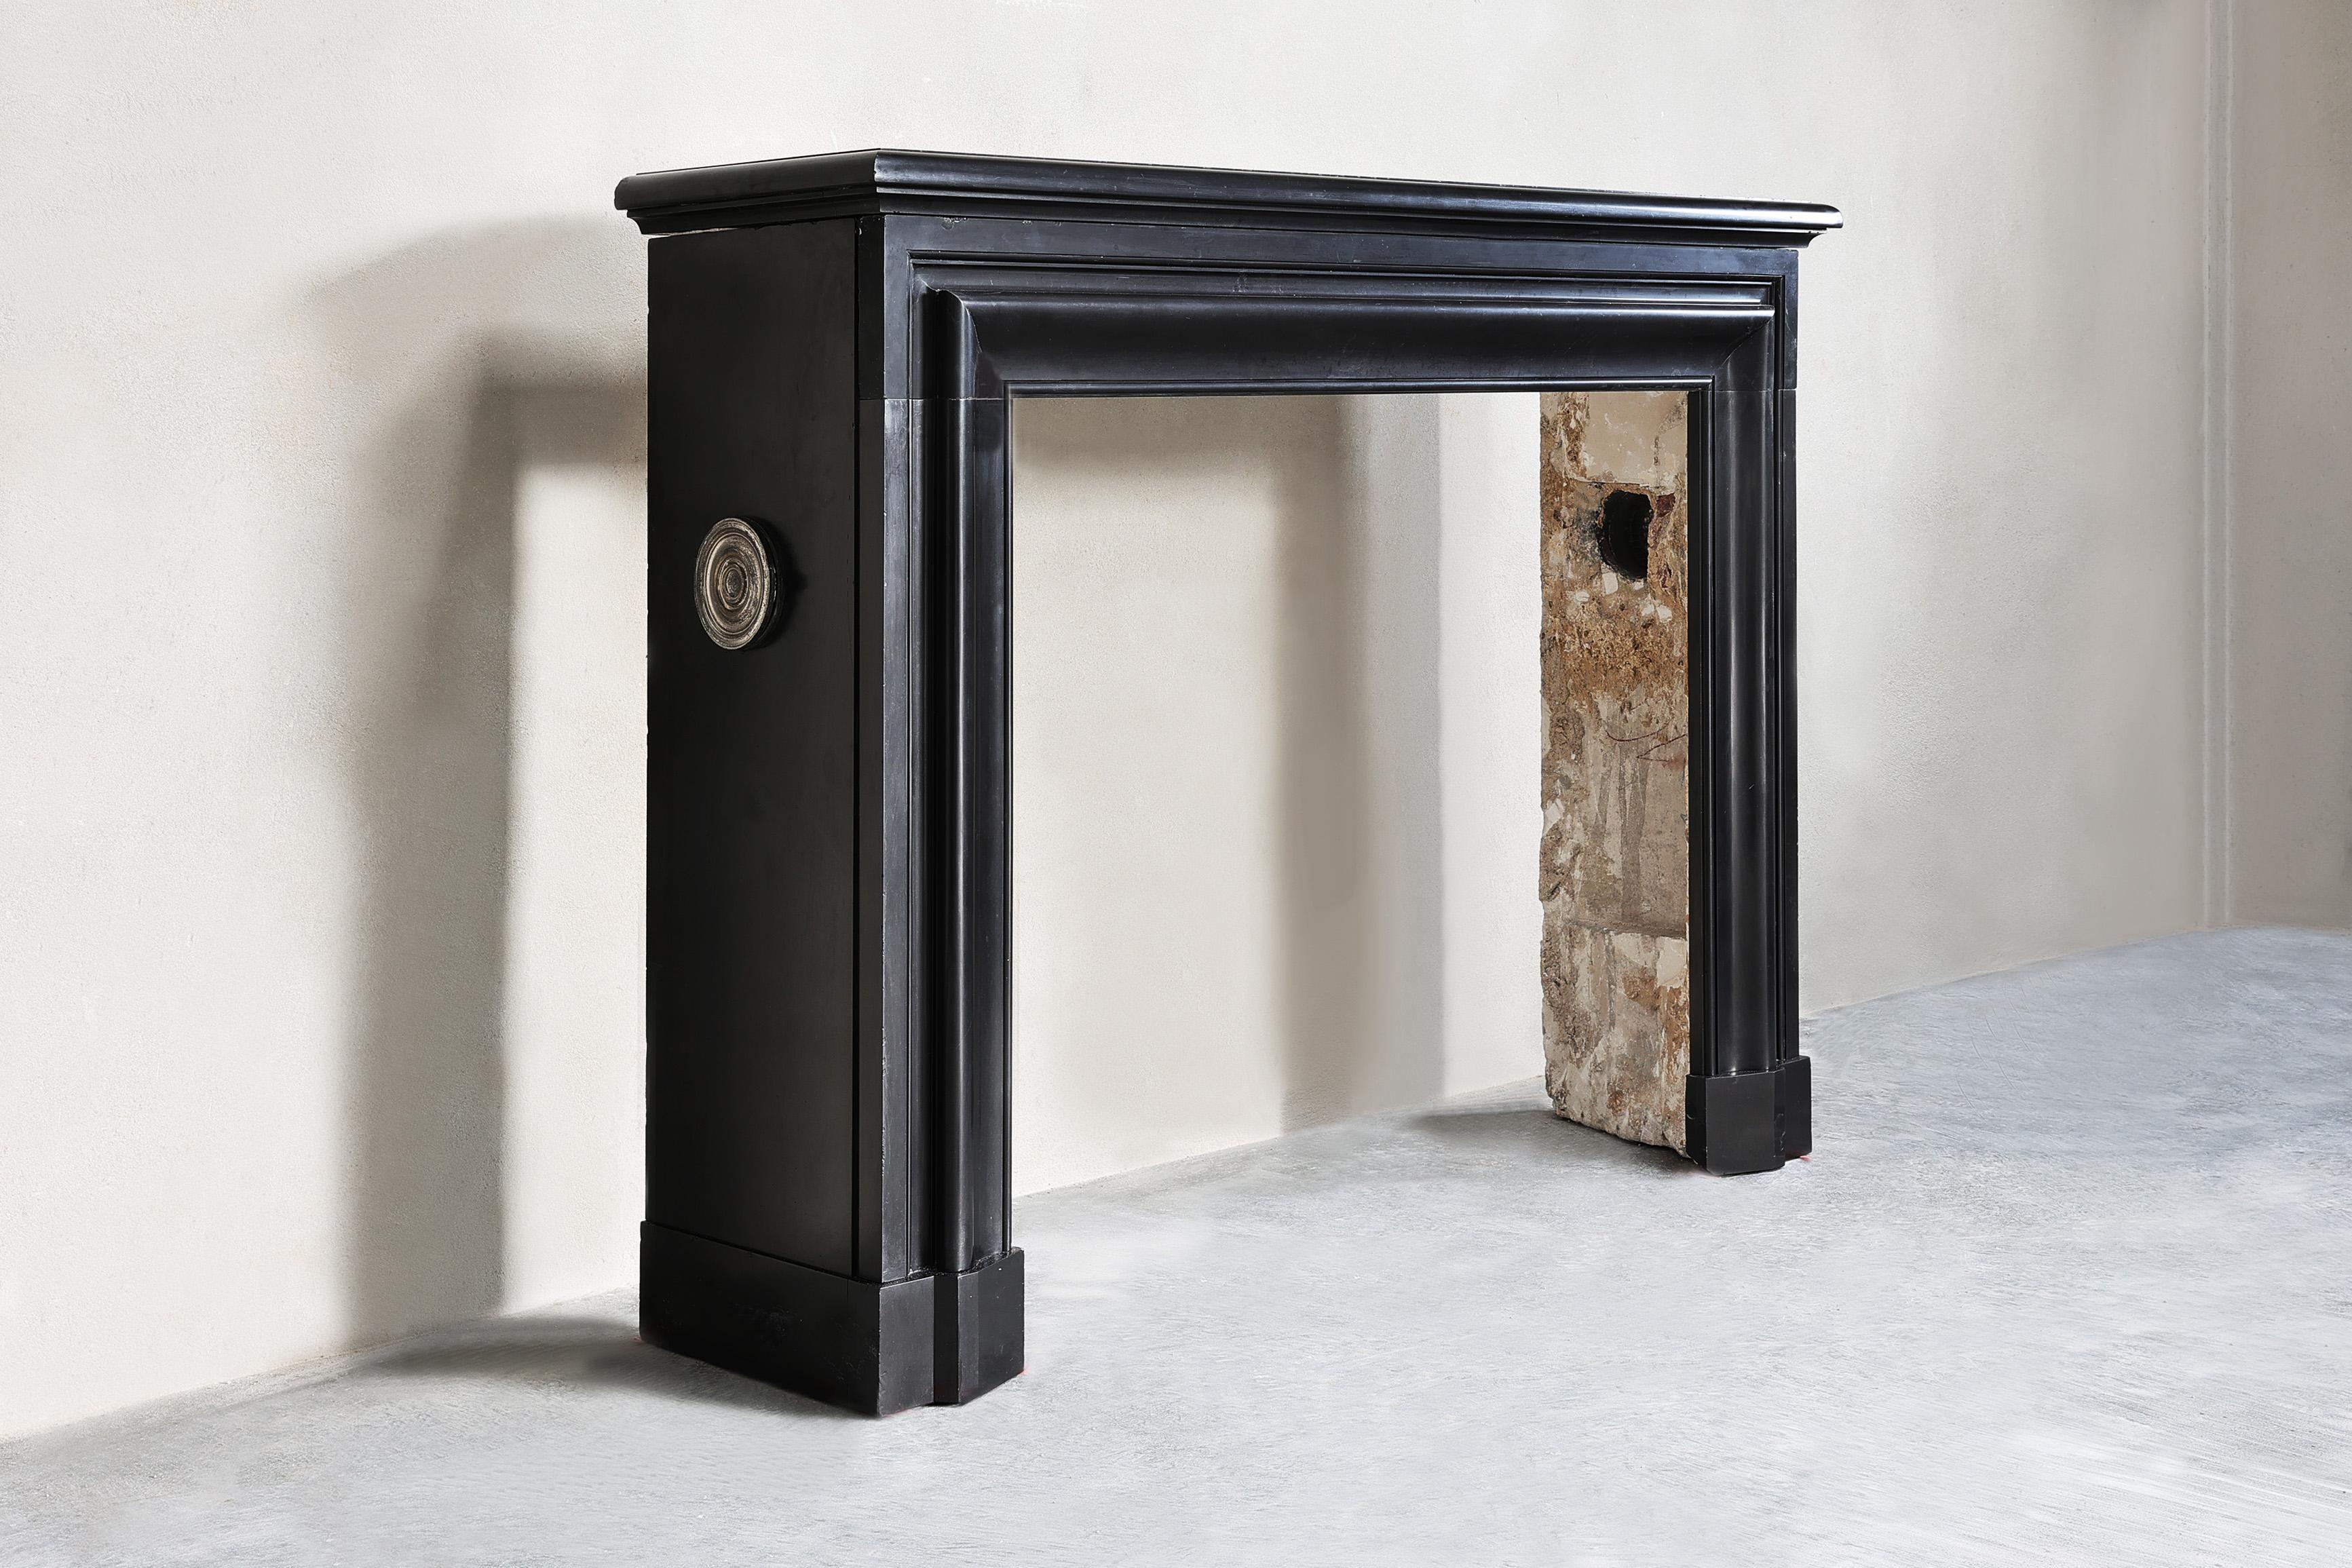 Beautiful antique mantelpiece made of Noir de Mazy marble in the style of Louis XVI. A fireplace from the 19th century with a sleek and chic look! The original grilles are still present on the sides of the mantelpiece.